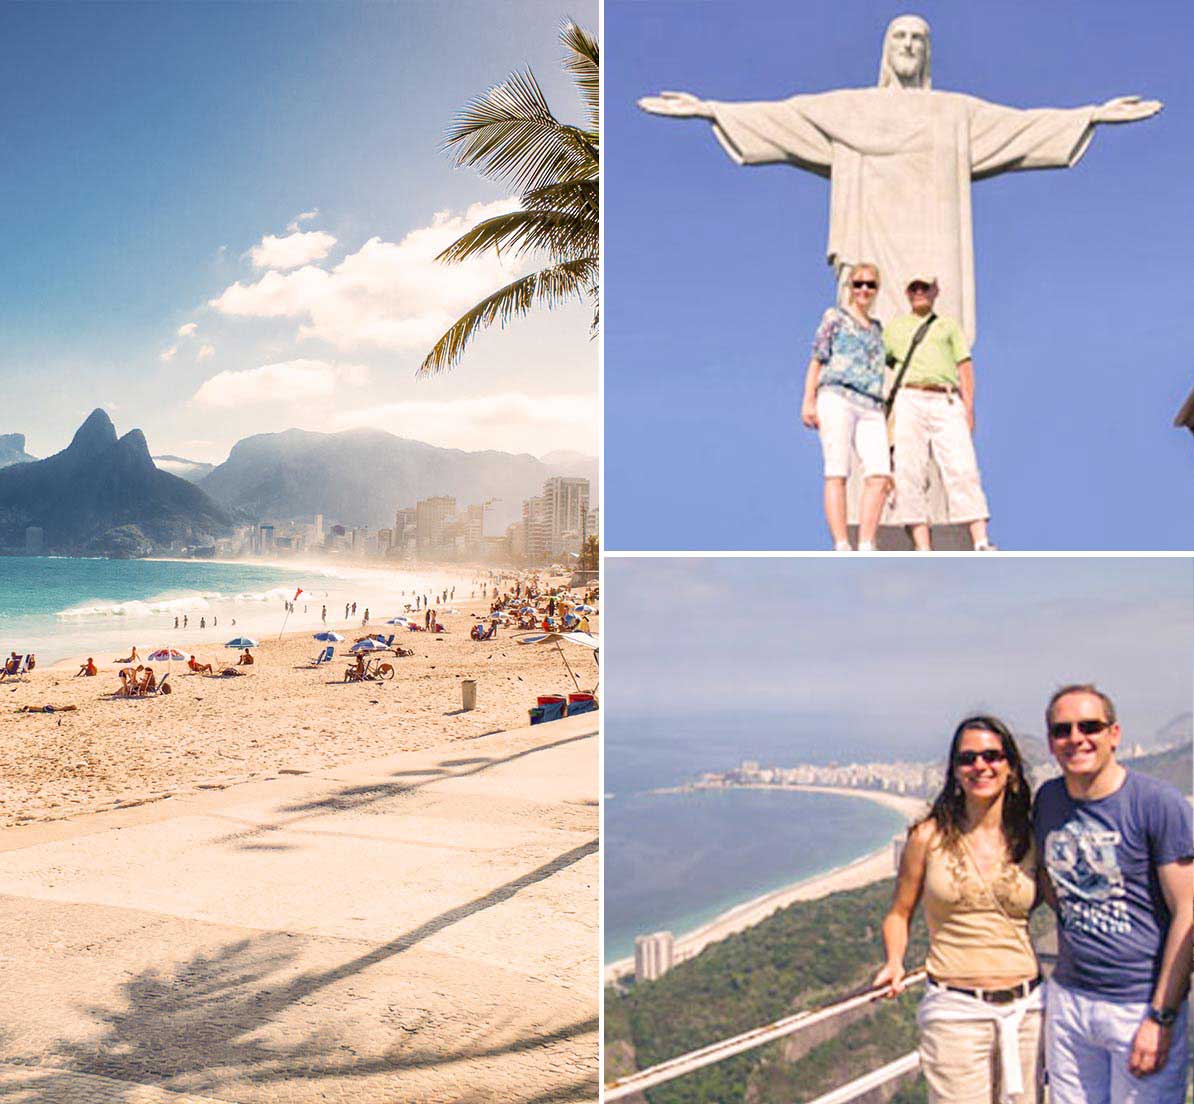 A collage showing various scenes in Rio de Janeiro, including the beach and Christ the Redeemer.